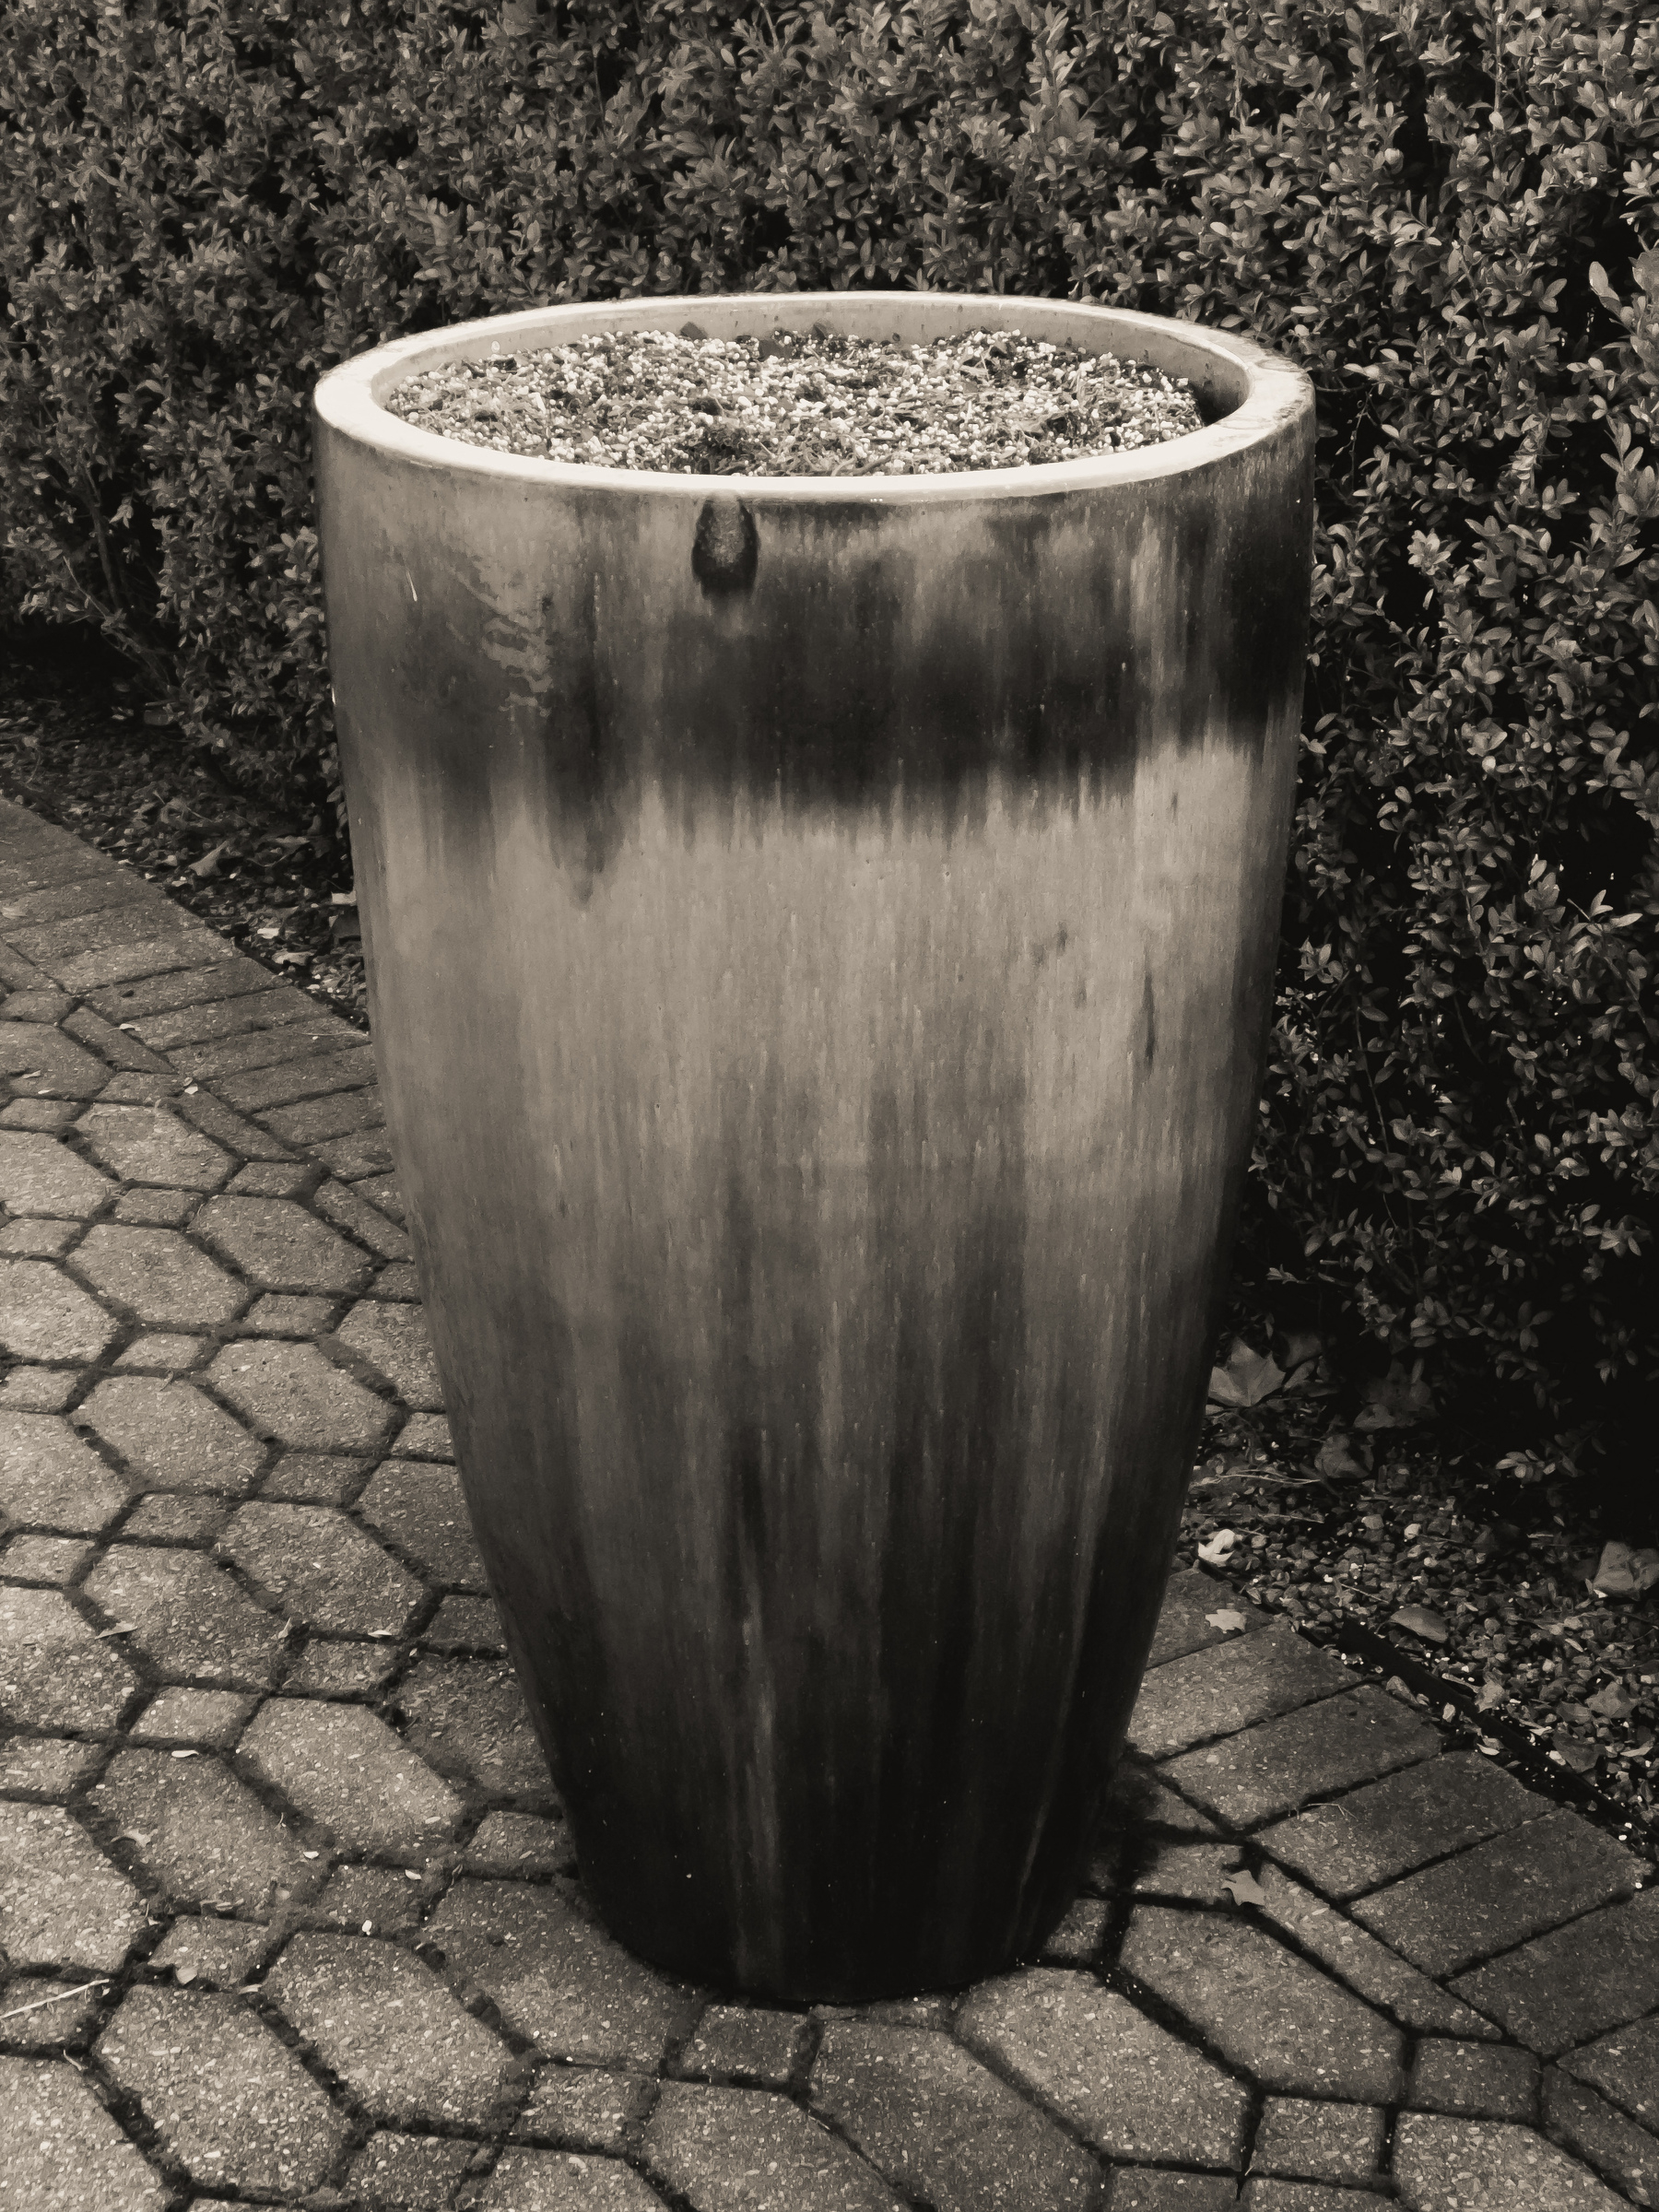 Large tall planter on a patio with manicured shrubs behind it.